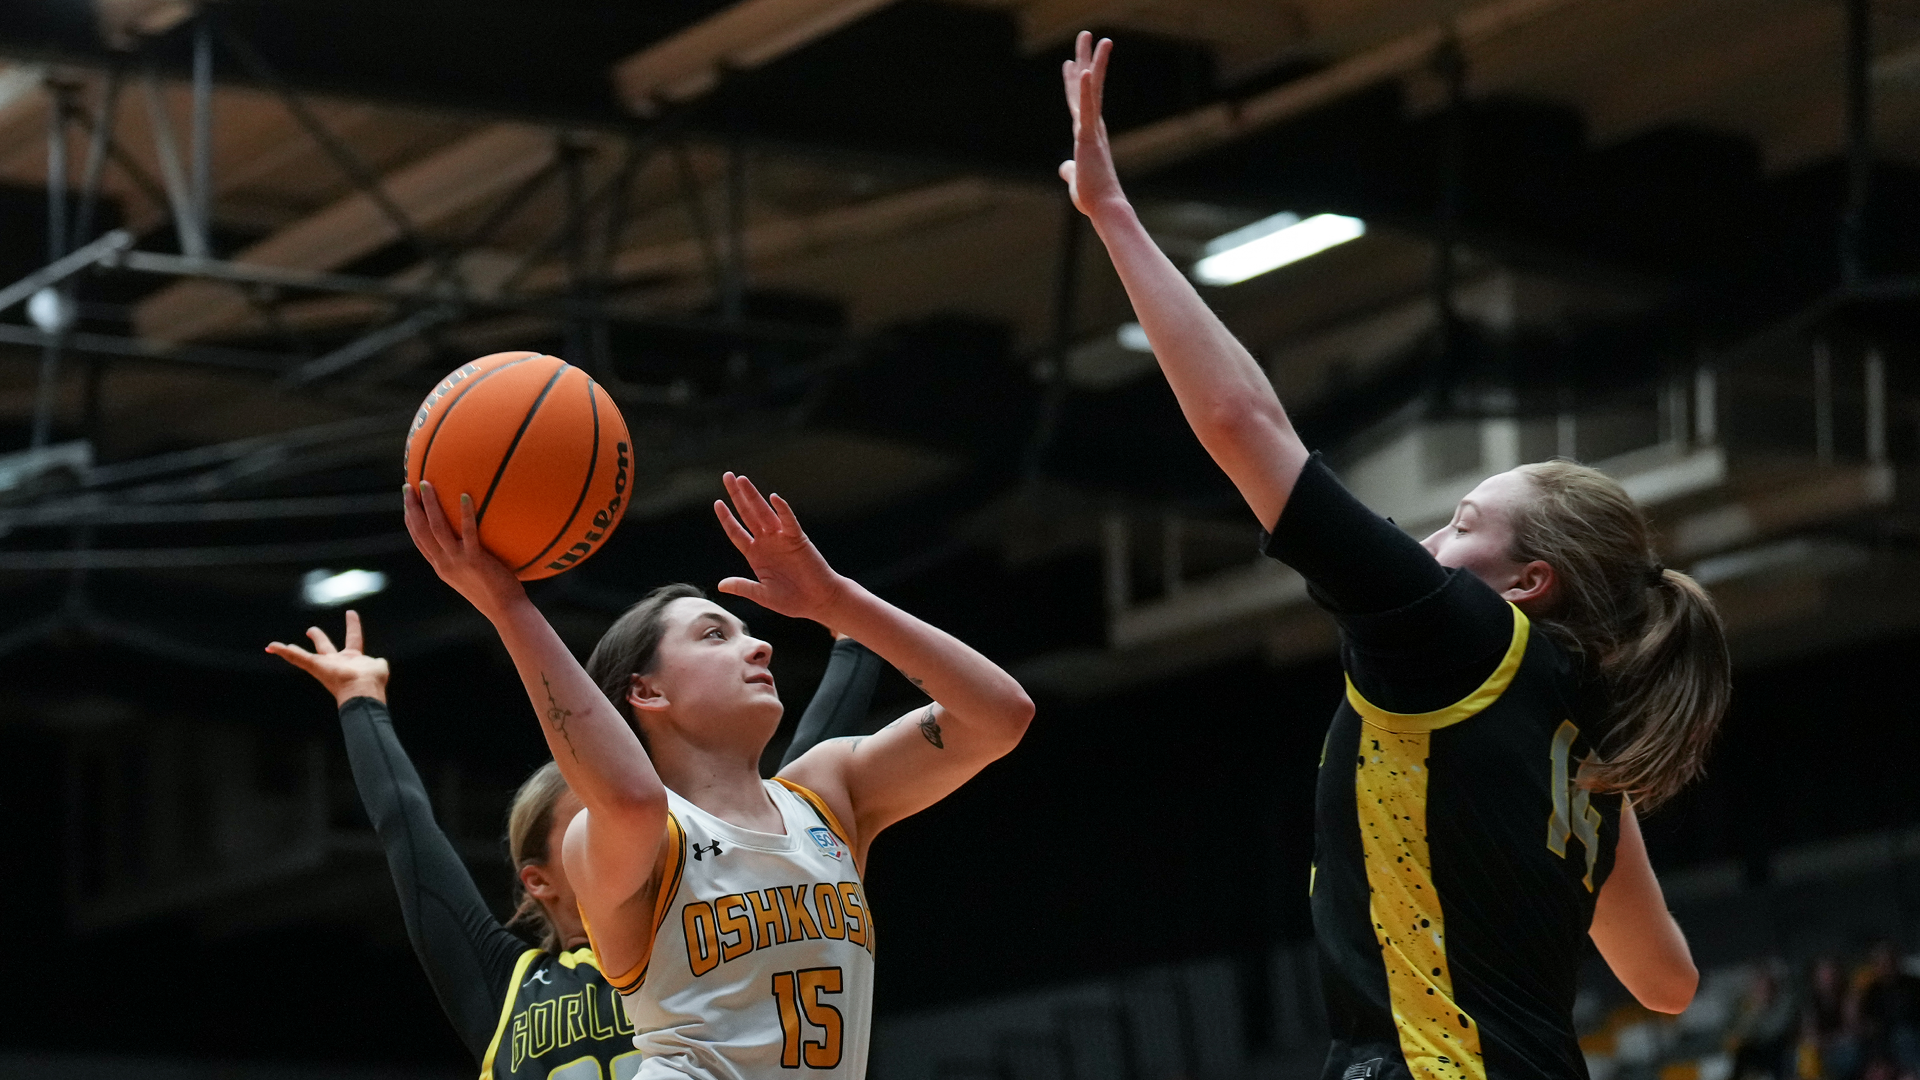 Kennedy Osterman scored 12 points in the Titans' win over Webster on Friday night. Photo Credit: Steve Frommell, UW-Oshkosh Sports Information